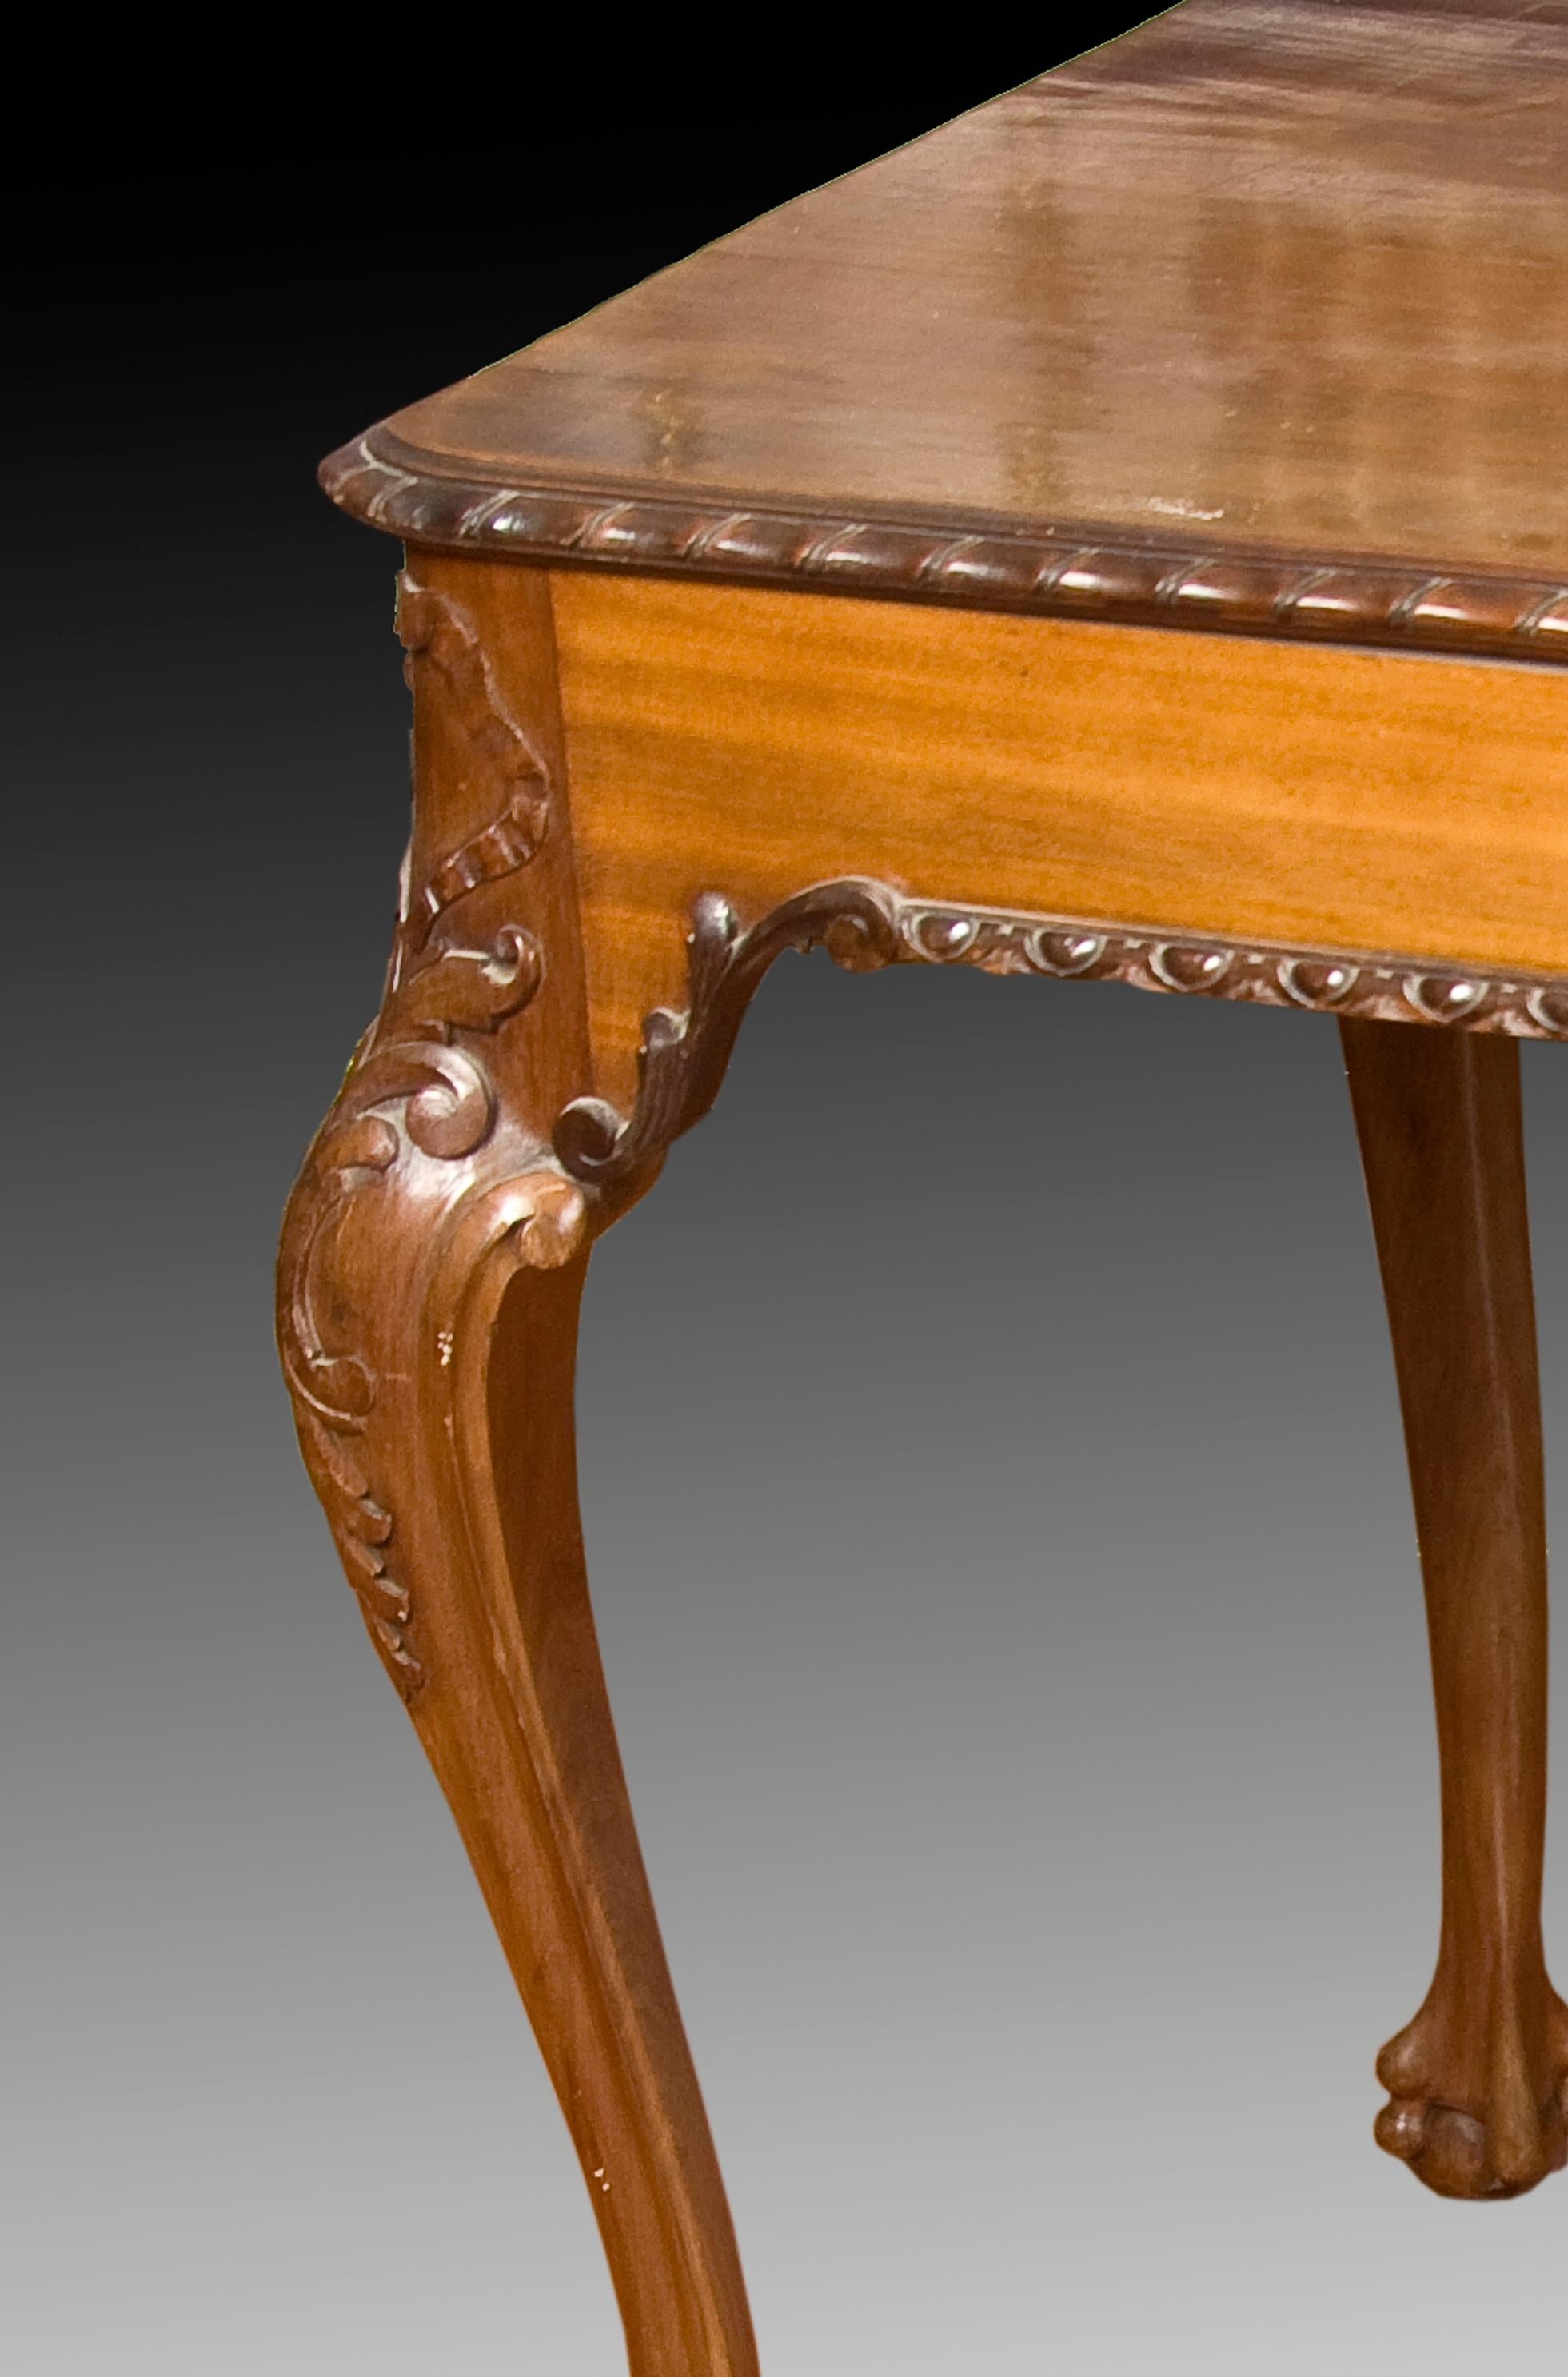 Rectangular board table decorated with a strip of vegetal motifs on the outer edge, waist enhanced with carved bands with oval and vegetable motifs of classicist influence and legs decorated with an elegant cabriolet shape and carved motifs